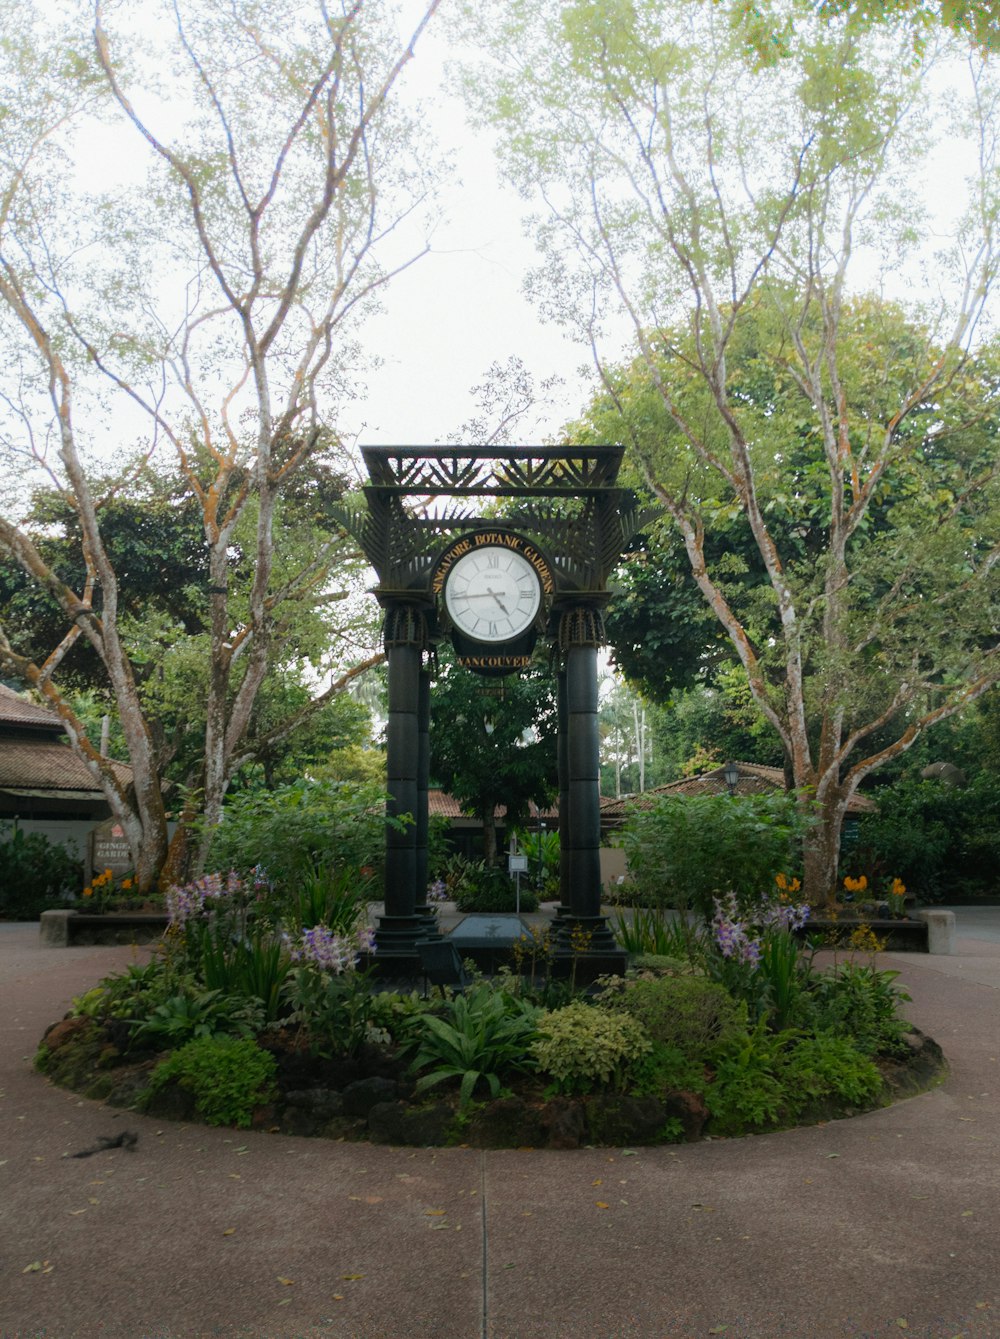 a clock sitting in the middle of a garden